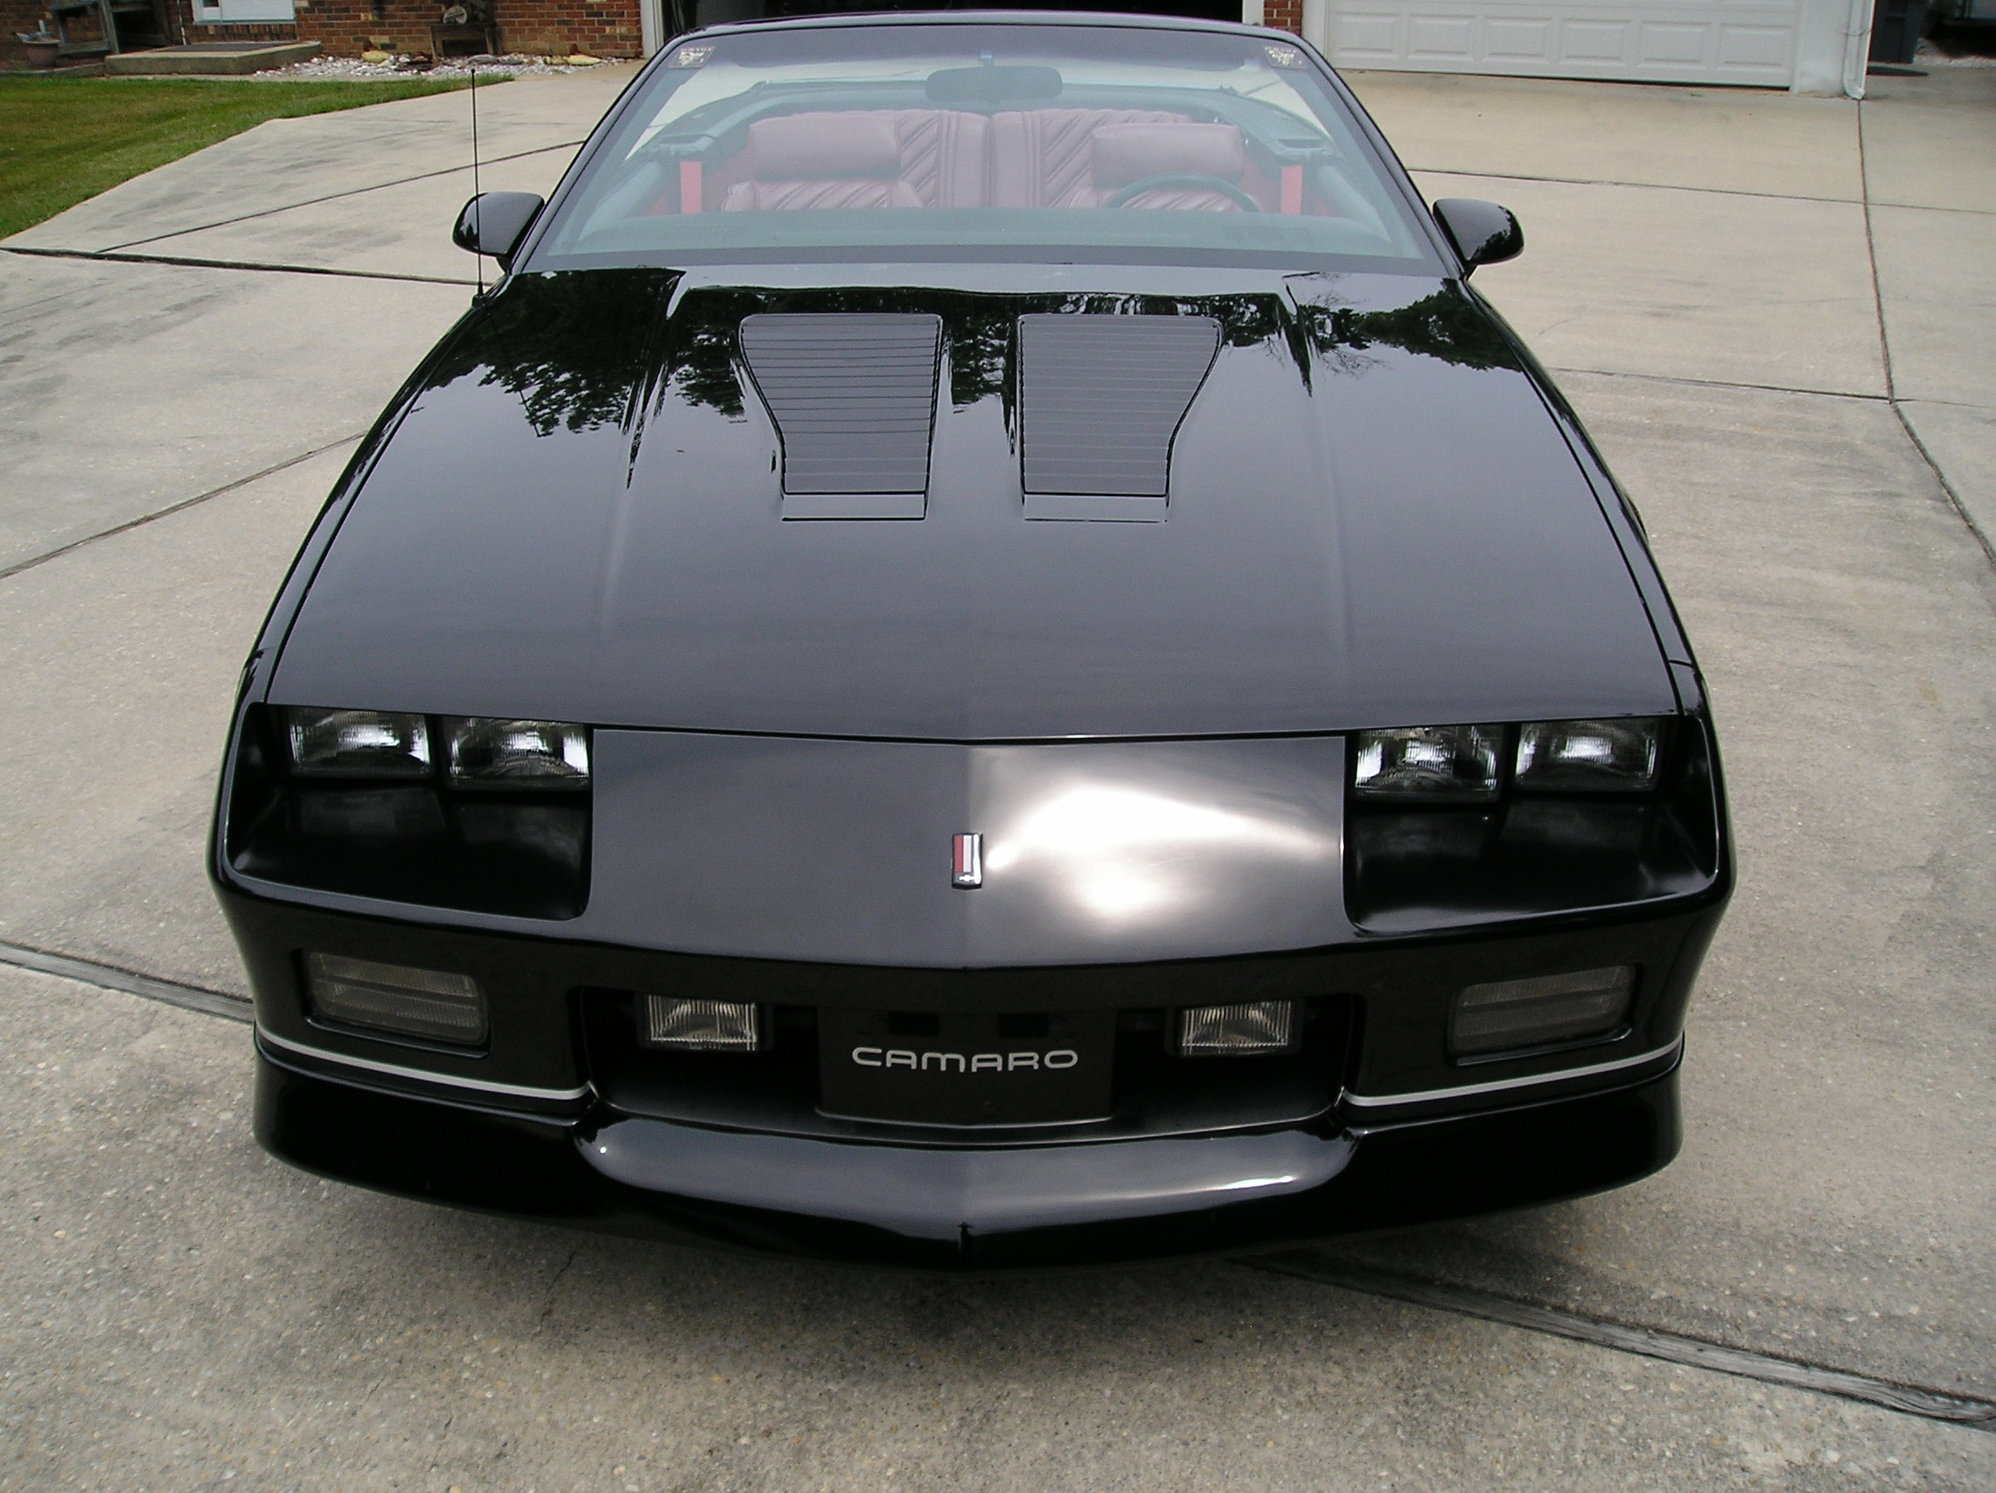 1987 Chevrolet Camaro - 1987 Chevy Camaro IROC-Z 20th Anniversary Convertible 5 speed - Used - VIN 1G1FP31F7HN149068 - 16,000 Miles - 8 cyl - 2WD - Manual - Convertible - Black - Perry Hall, MD 21128, United States